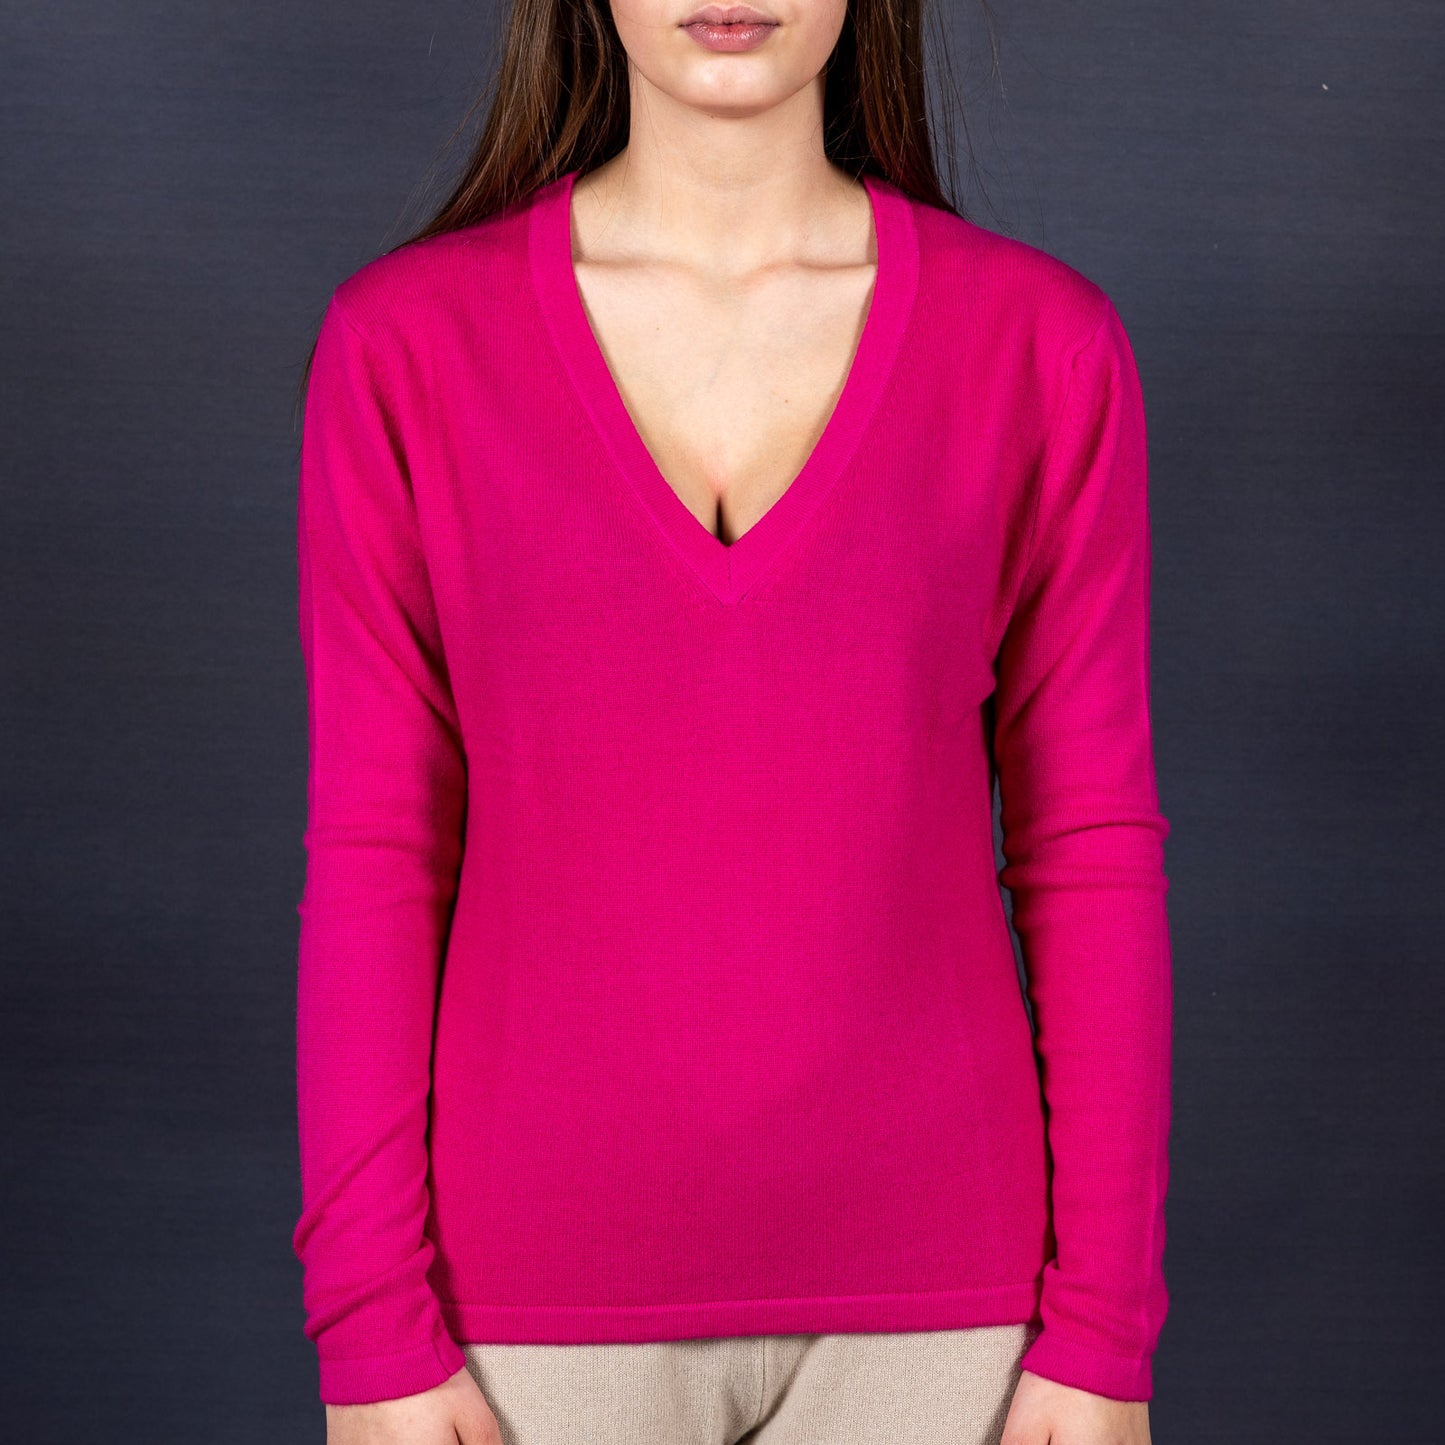 Pullover 100% cashmere - in 12 different colors to match your STELLA ESVARA scarf - Deep V neckline, tailored, feminine and cuddly soft